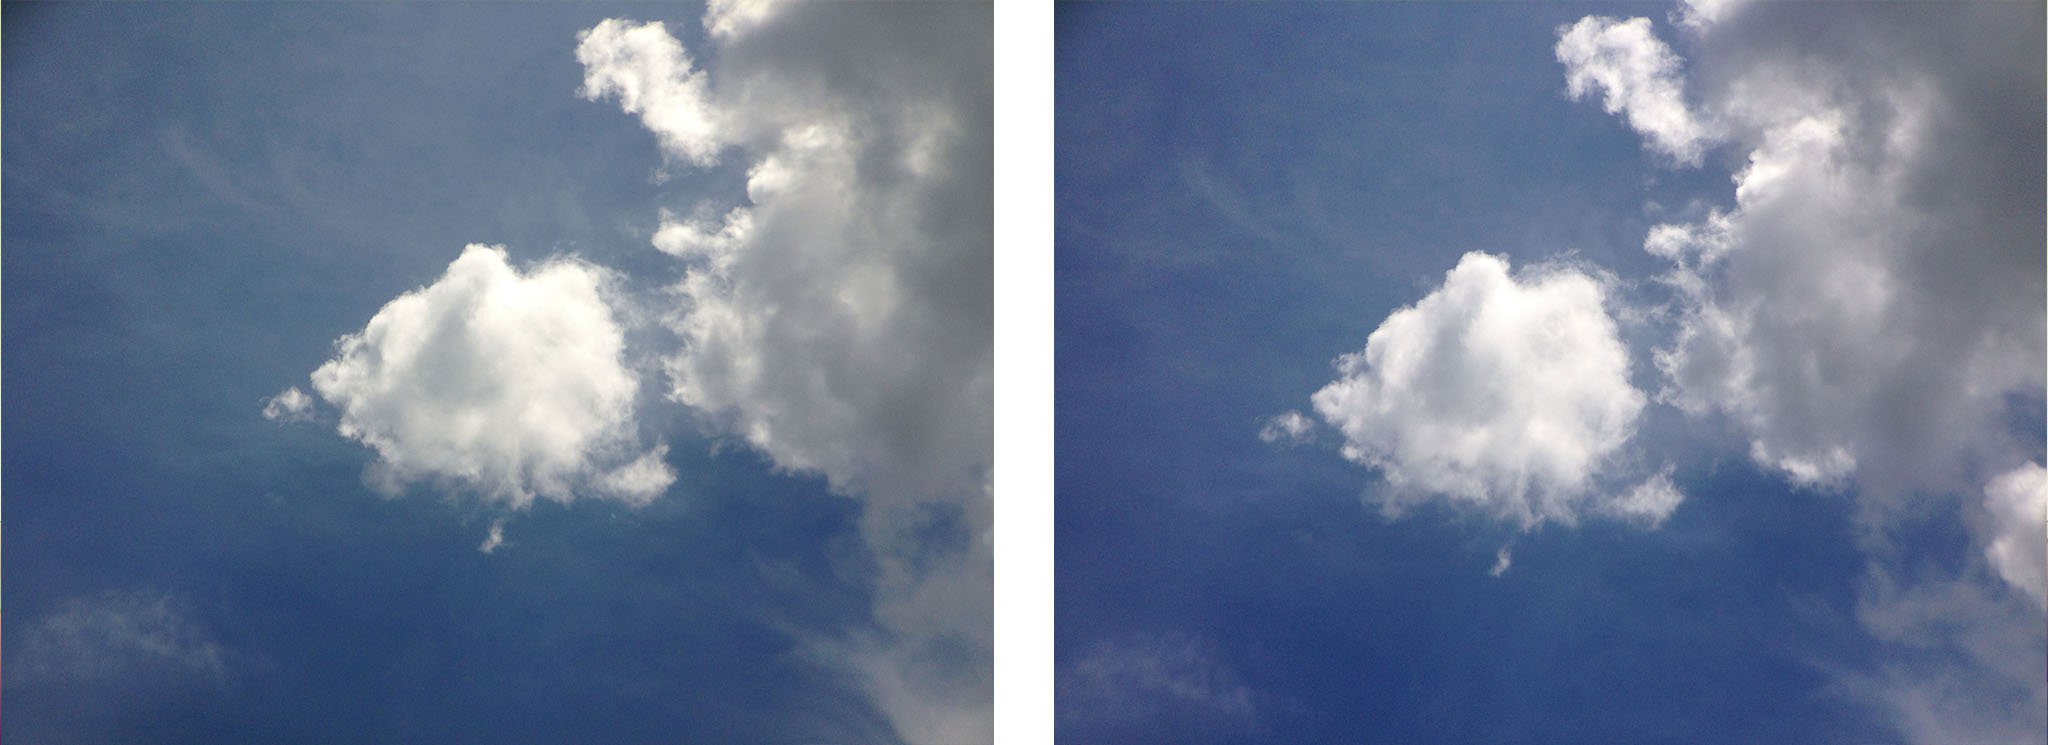 Circular polarizing lens, with and without